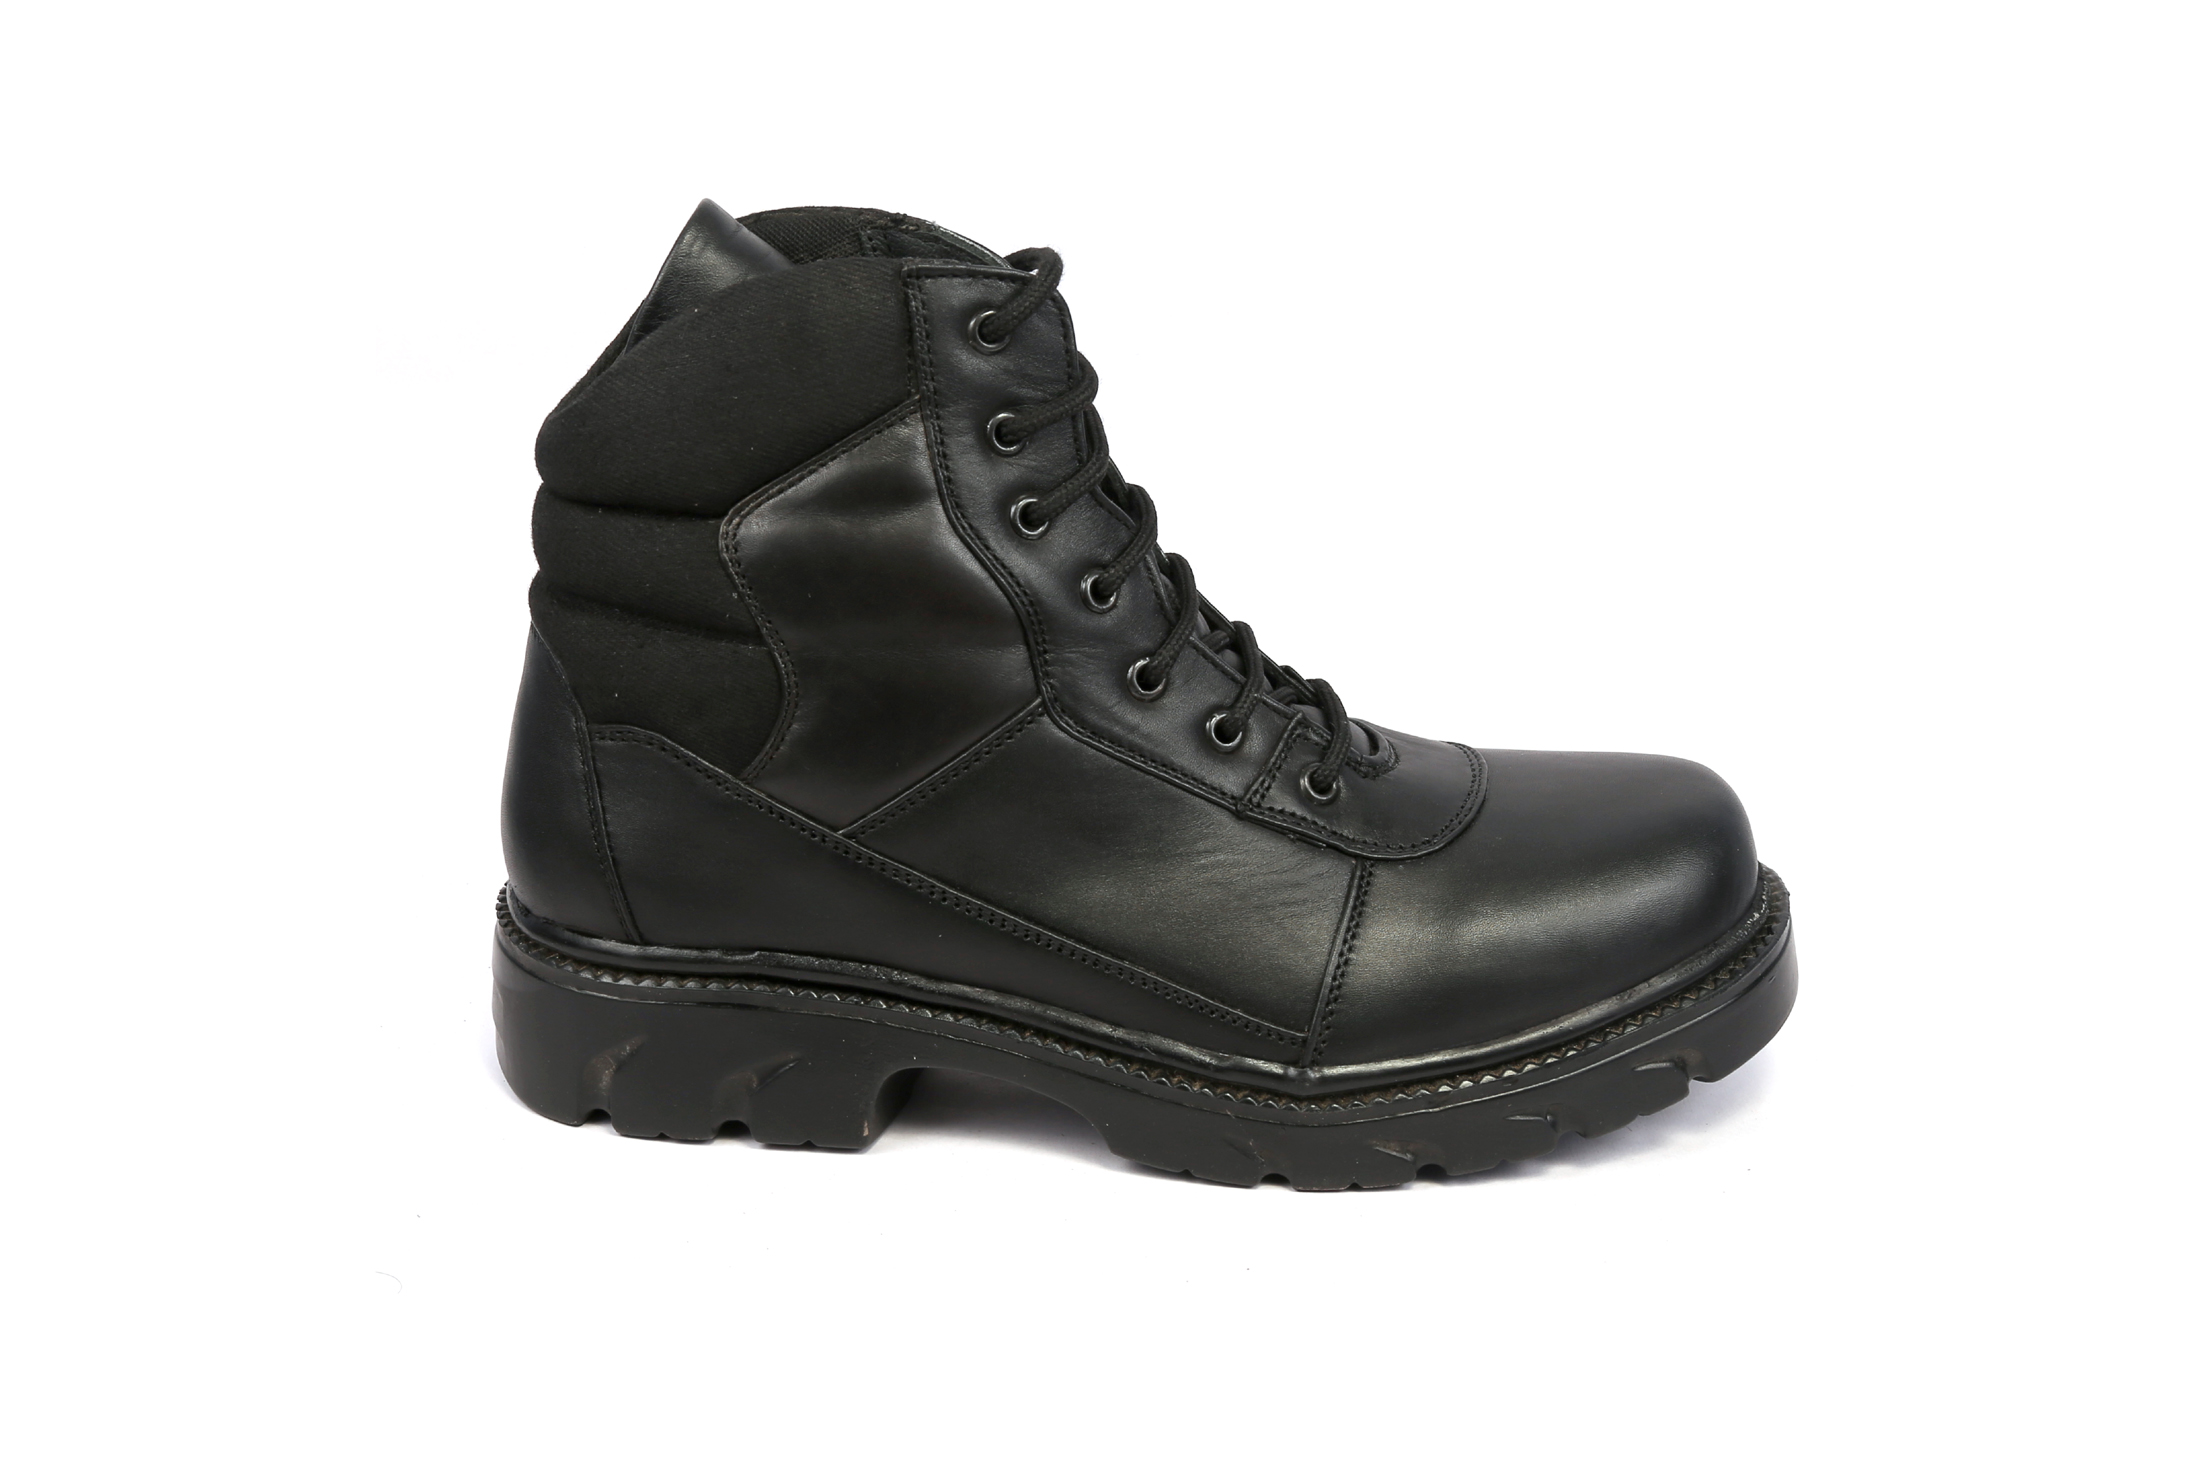 Buy JEU010 FORMAL DMS BOOTS Online @ ₹1799 from ShopClues